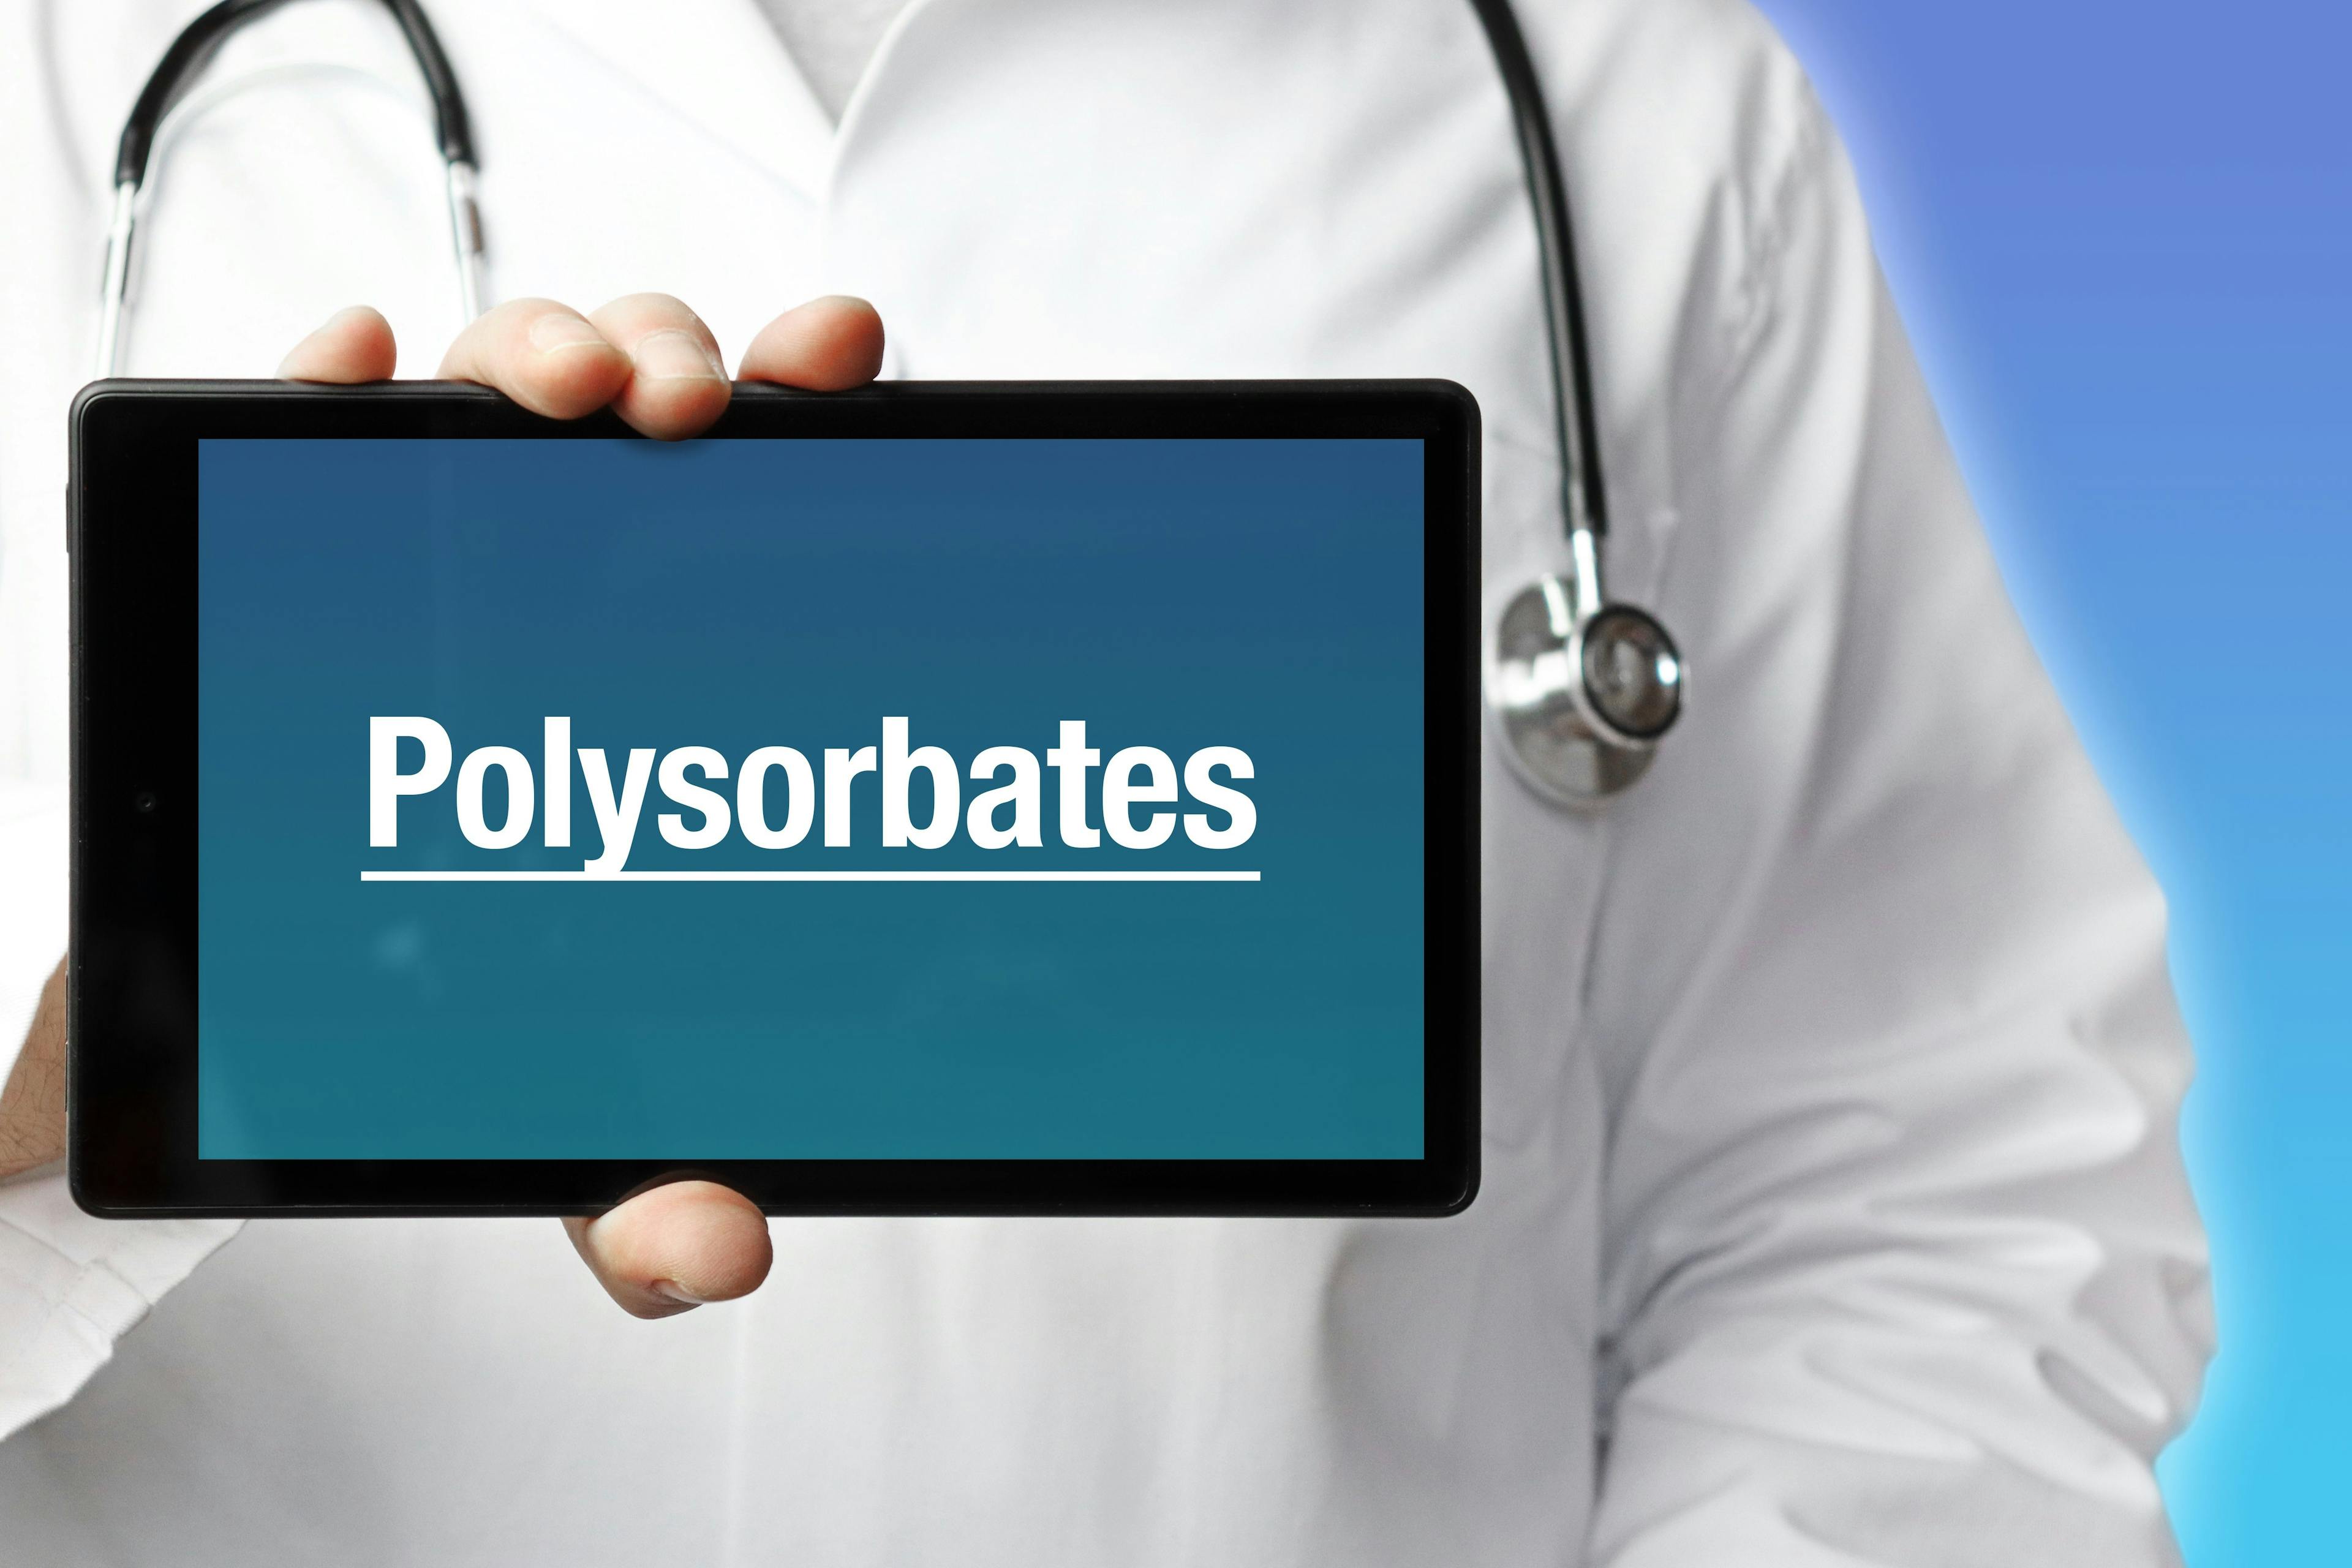 Polysorbates. Doctor in smock holds up a tablet computer. The term Polysorbates is in the display. Concept of disease, health, medicine | Image Credit: © MQ-Illustrations - stock.adobe.com